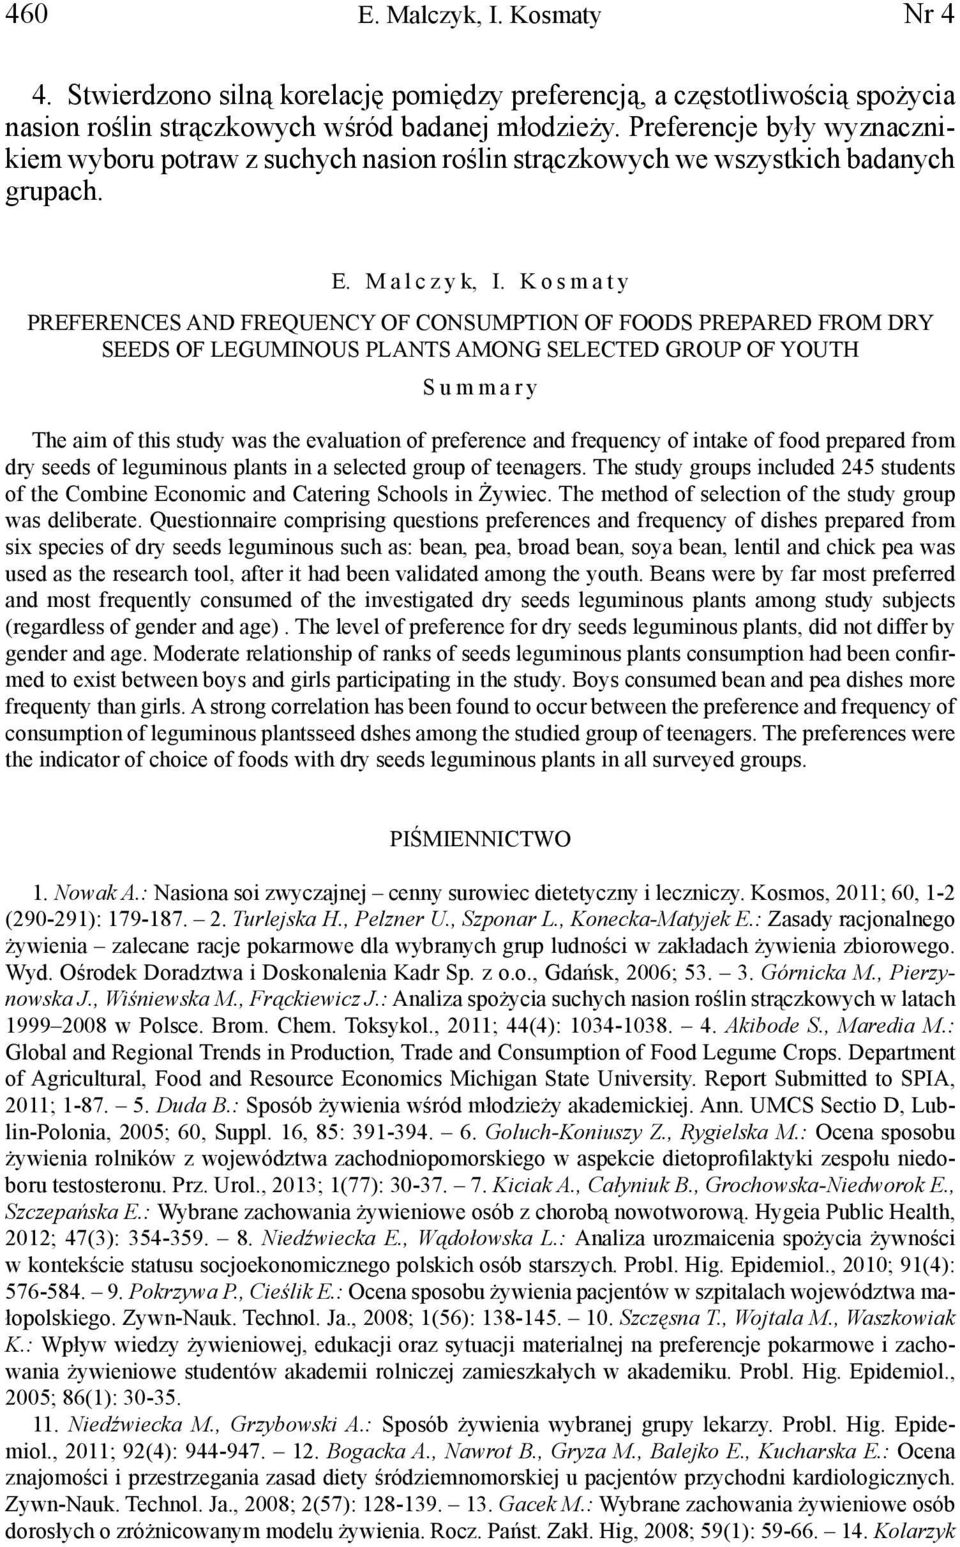 Kosmaty PEFEENCES AND FEQUENCY OF CONSUMPTION OF FOODS PEPAED FOM DY SEEDS OF LEGUMINOUS PLANTS AMONG SELECTED GOUP OF YOUTH Summary The aim of this study was the evaluation of preference and